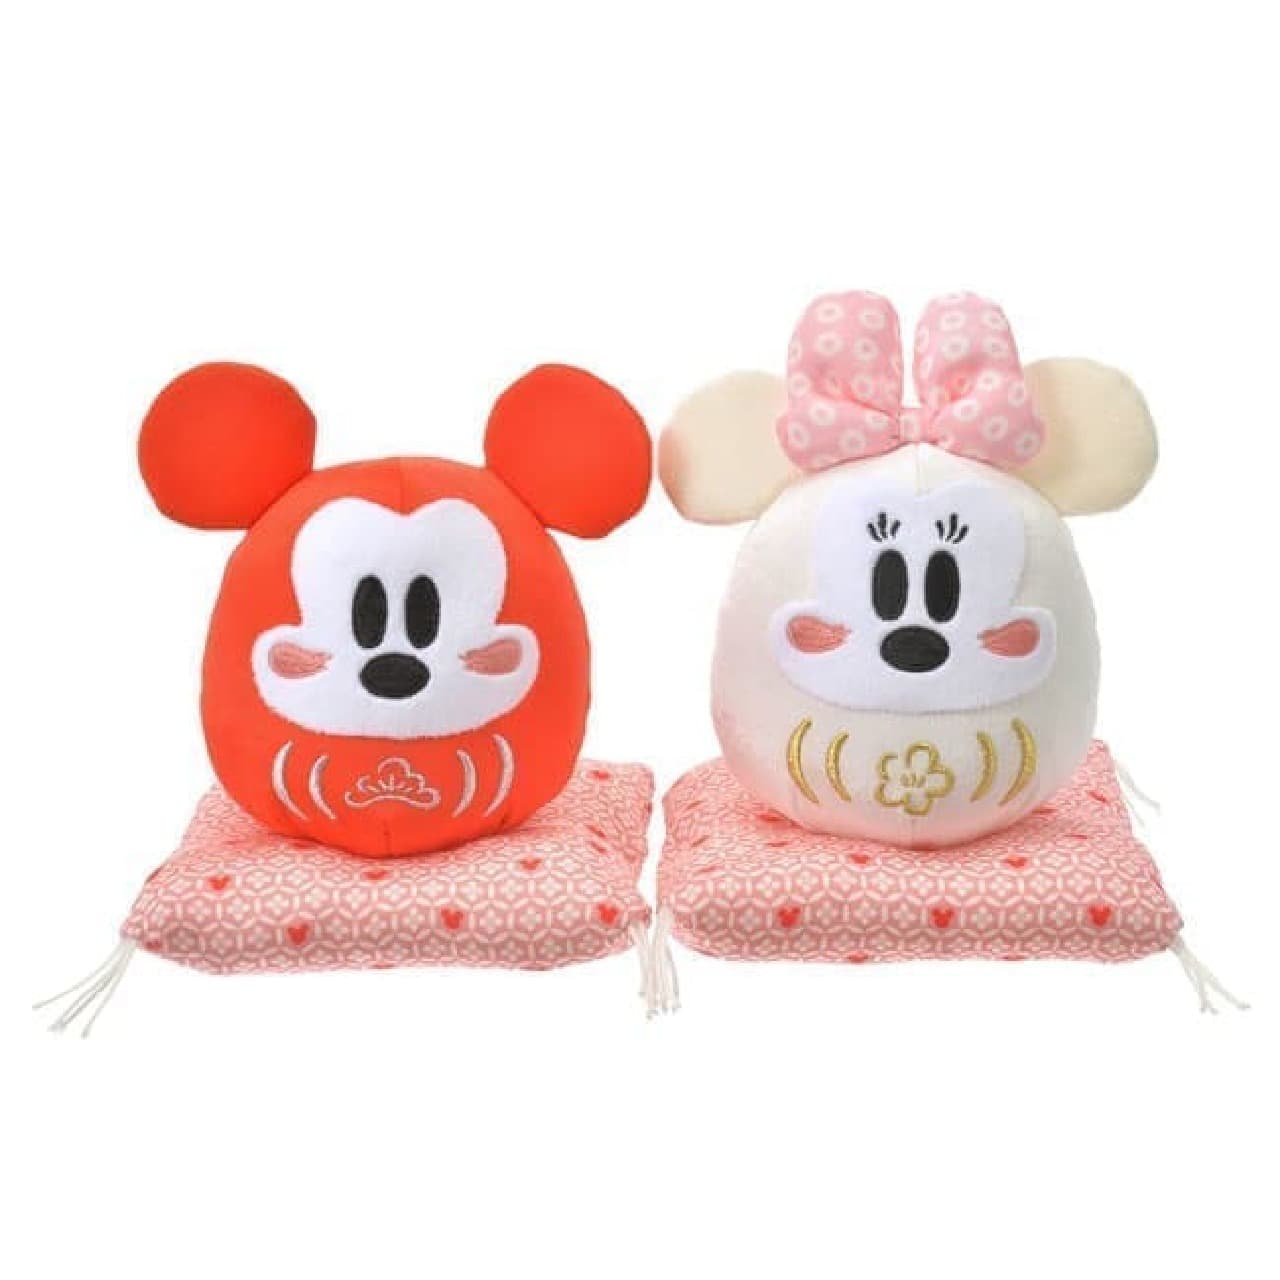 New Year's items from Disney Store --Mickey & Minnie, a red and white Daruma doll, Tsum Tsum in "Ox" costume, etc.